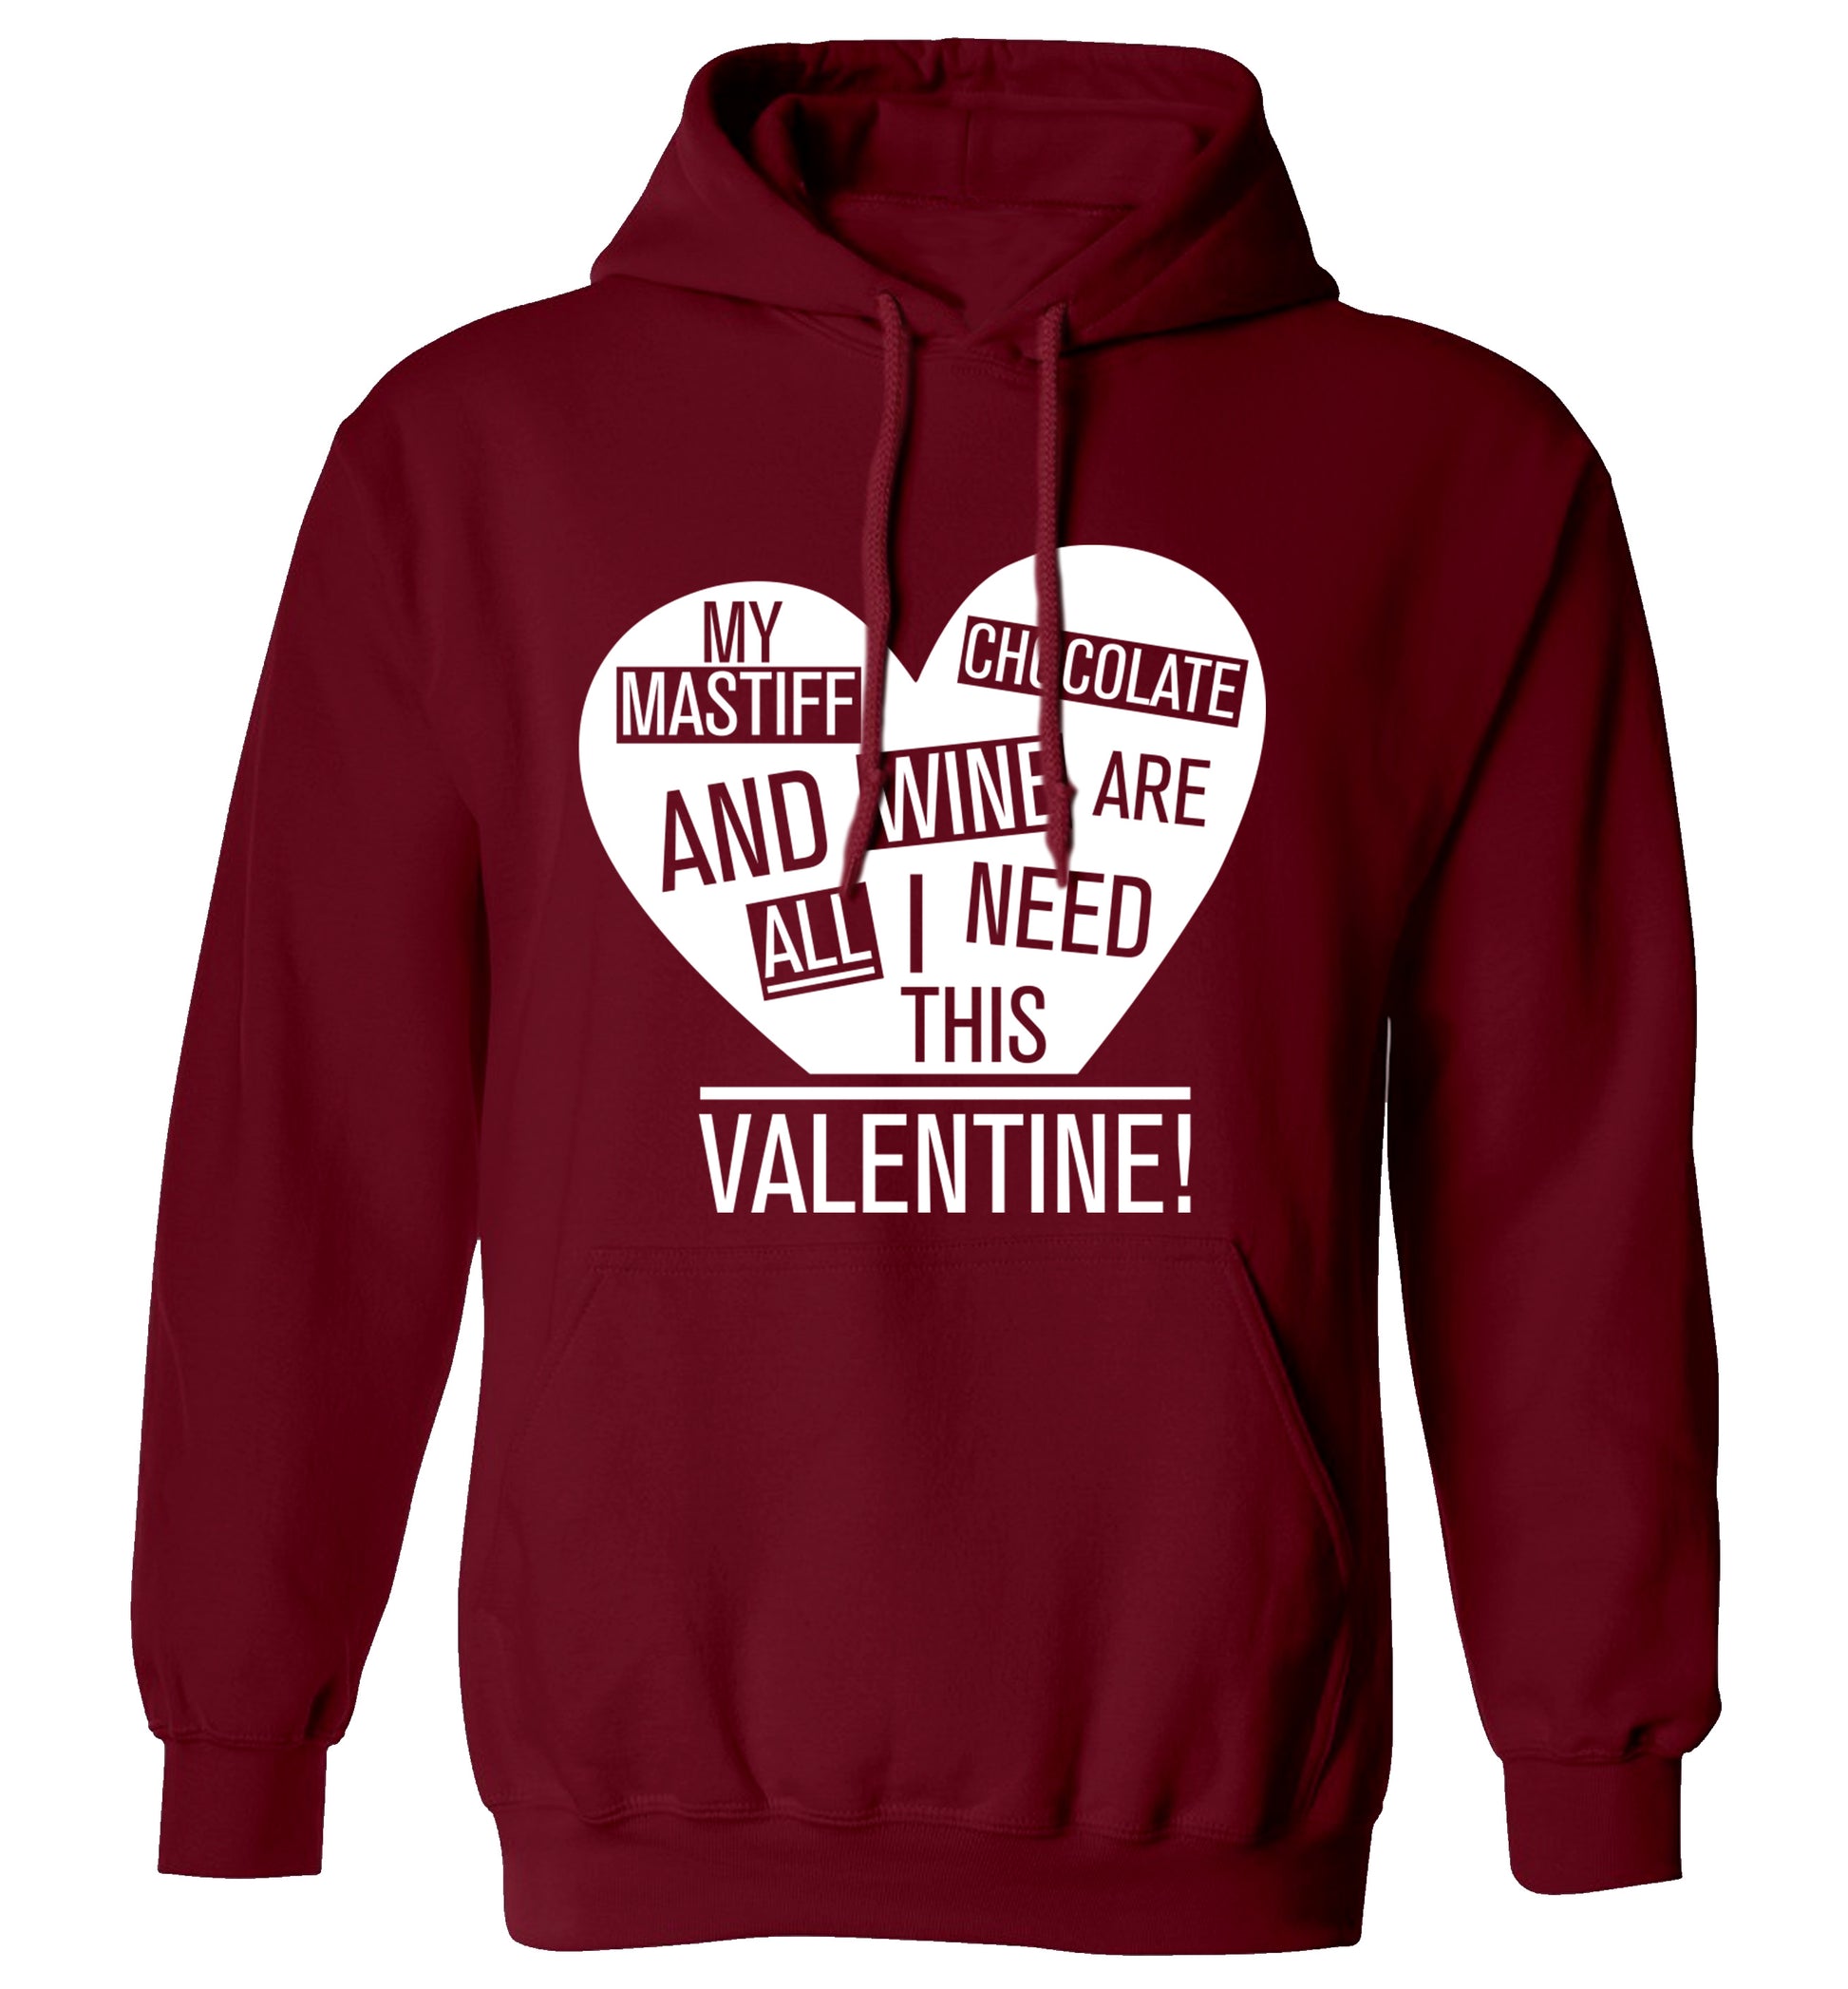 My mastiff, chocolate and wine are all I need this valentine! adults unisex maroon hoodie 2XL